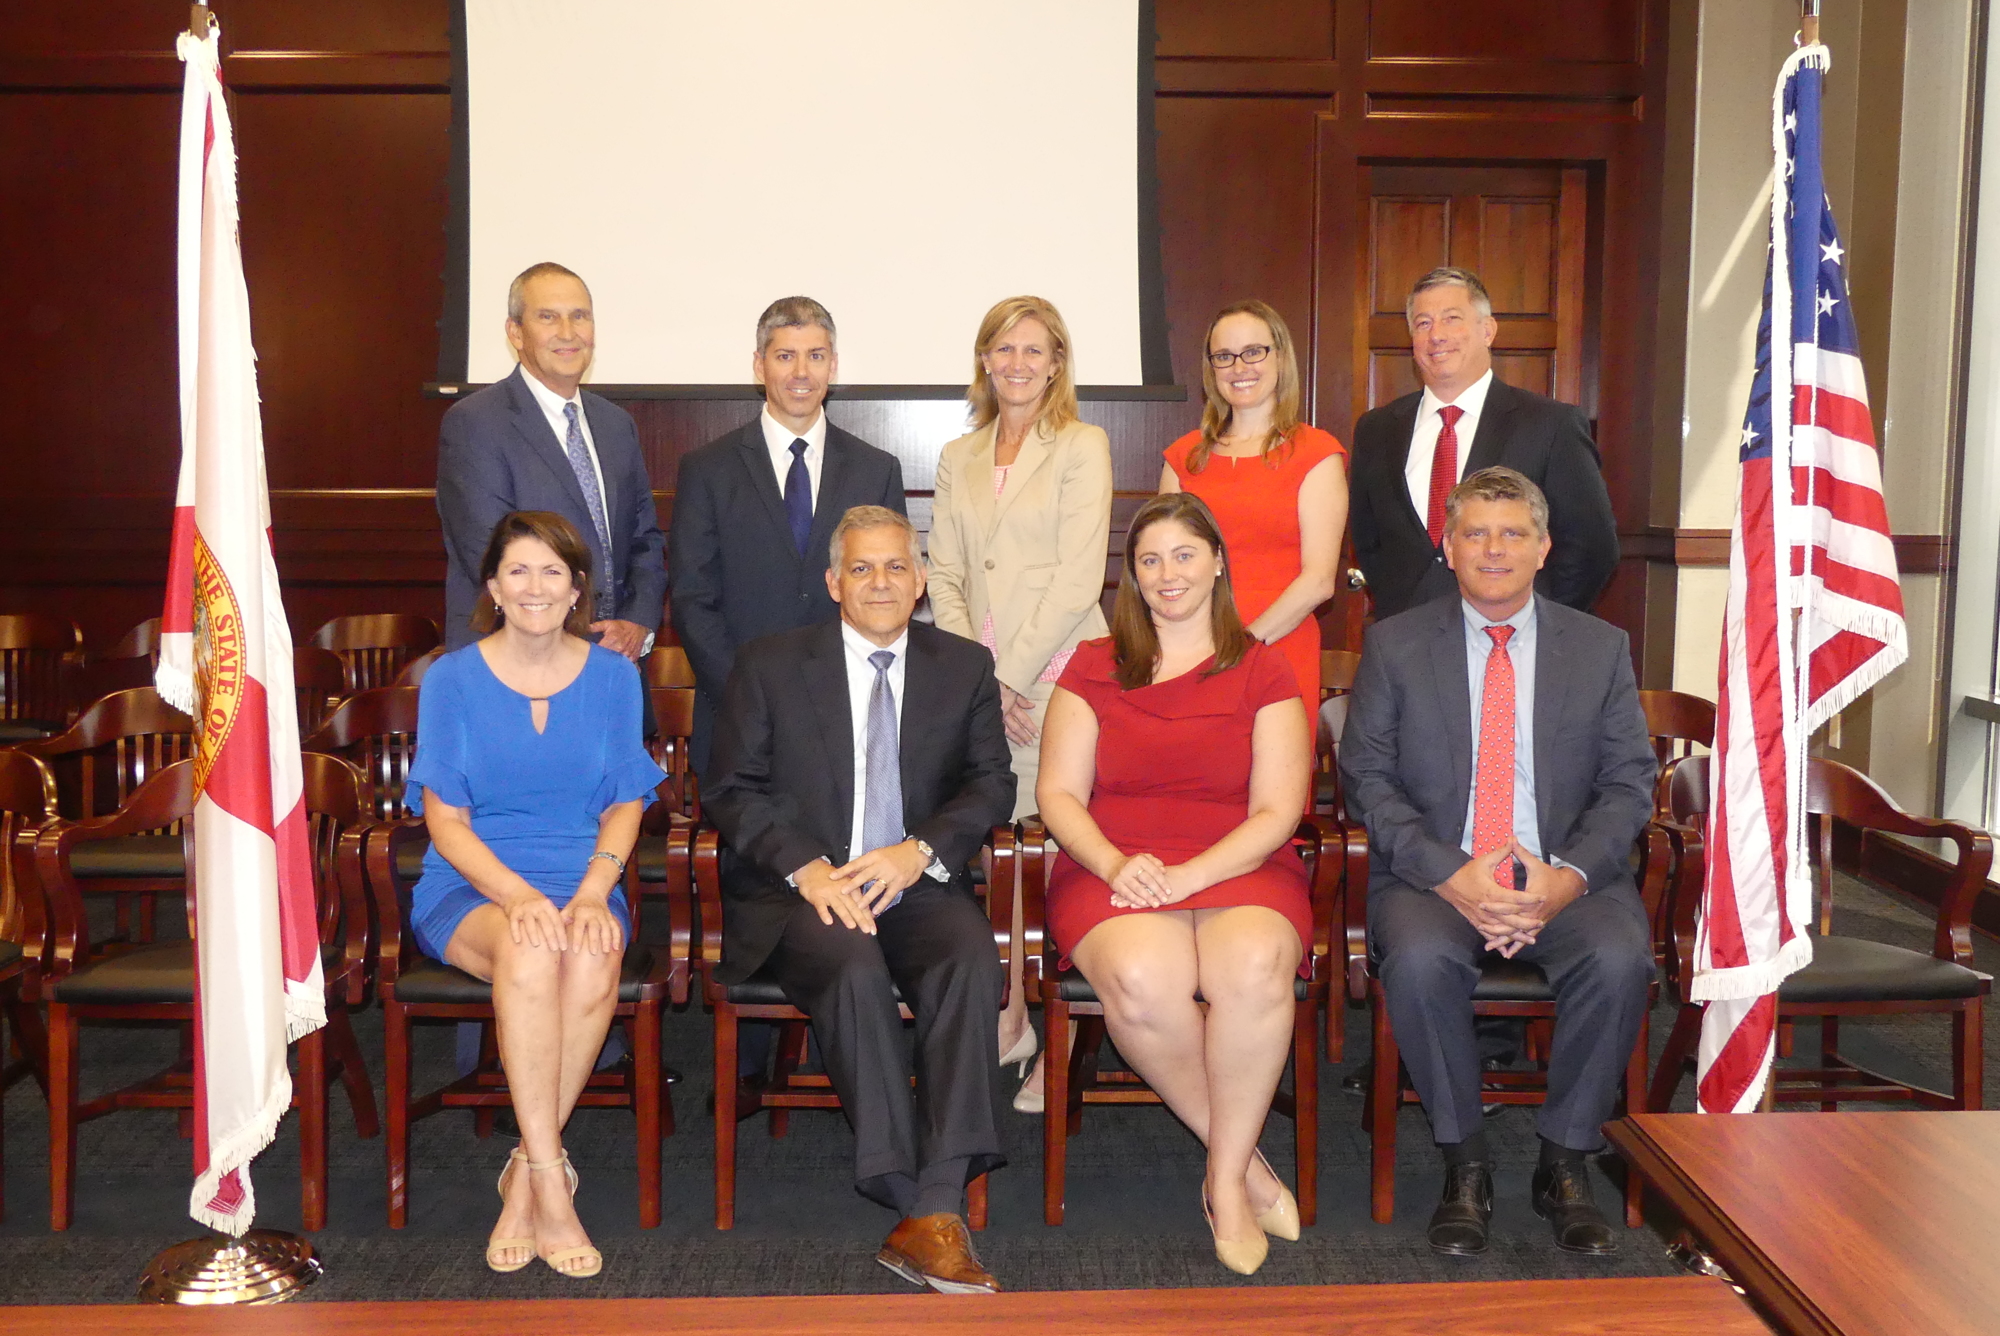 The 4th Circuit Judicial Nominating Commission.